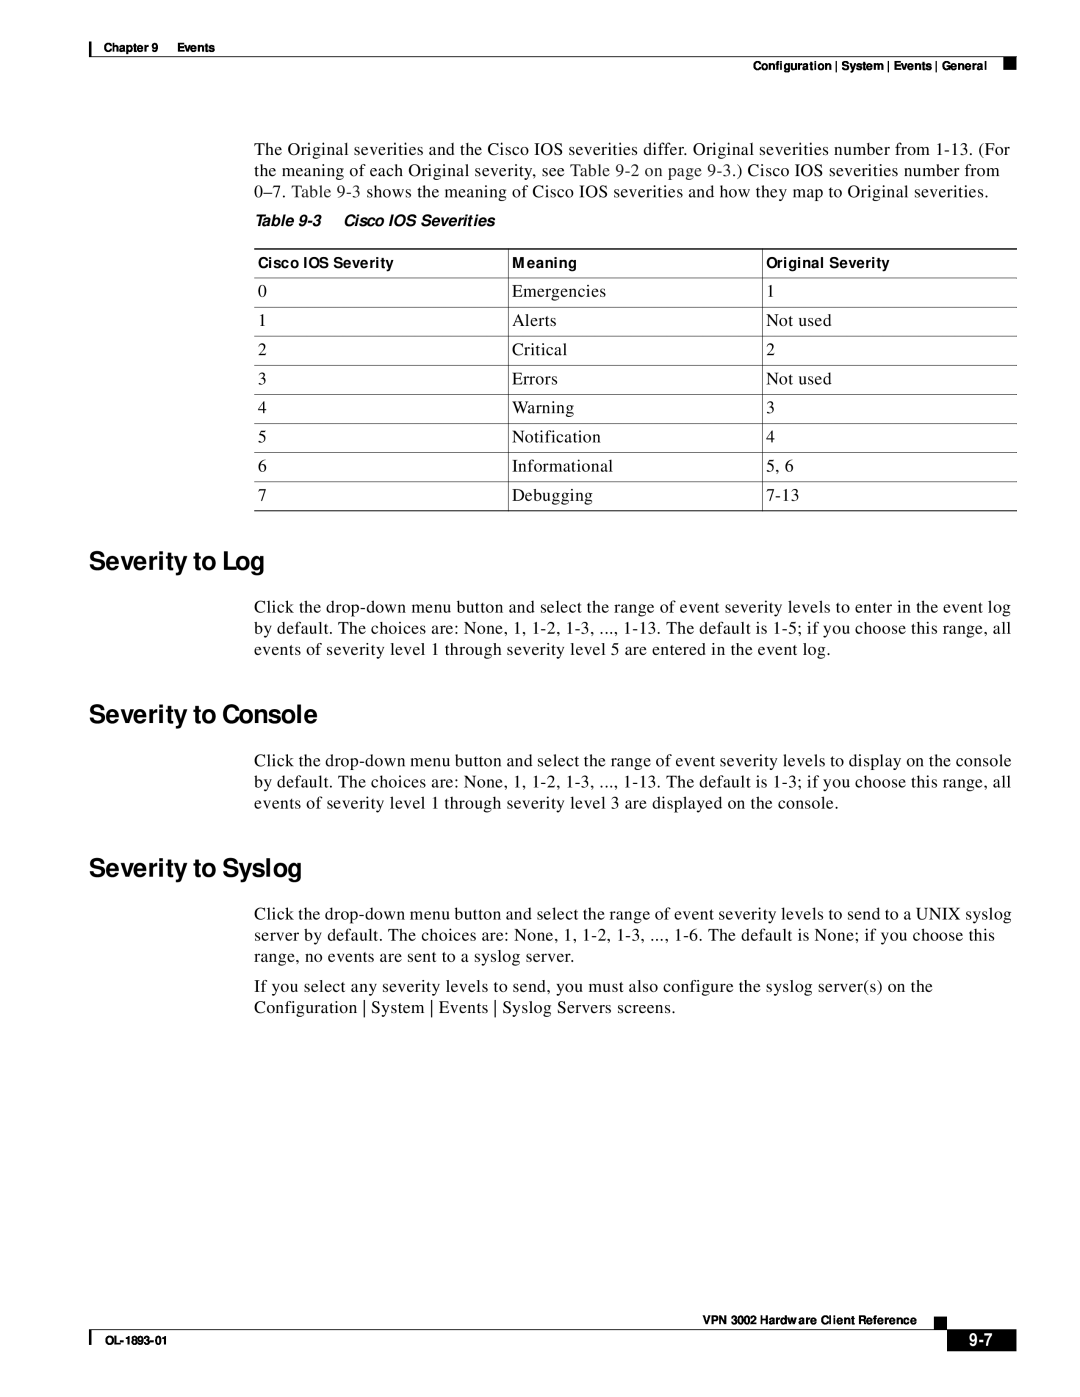 Cisco Systems VPN 3002 manual Severity to Log, Severity to Console, Severity to Syslog, Cisco IOS Severity, Meaning 